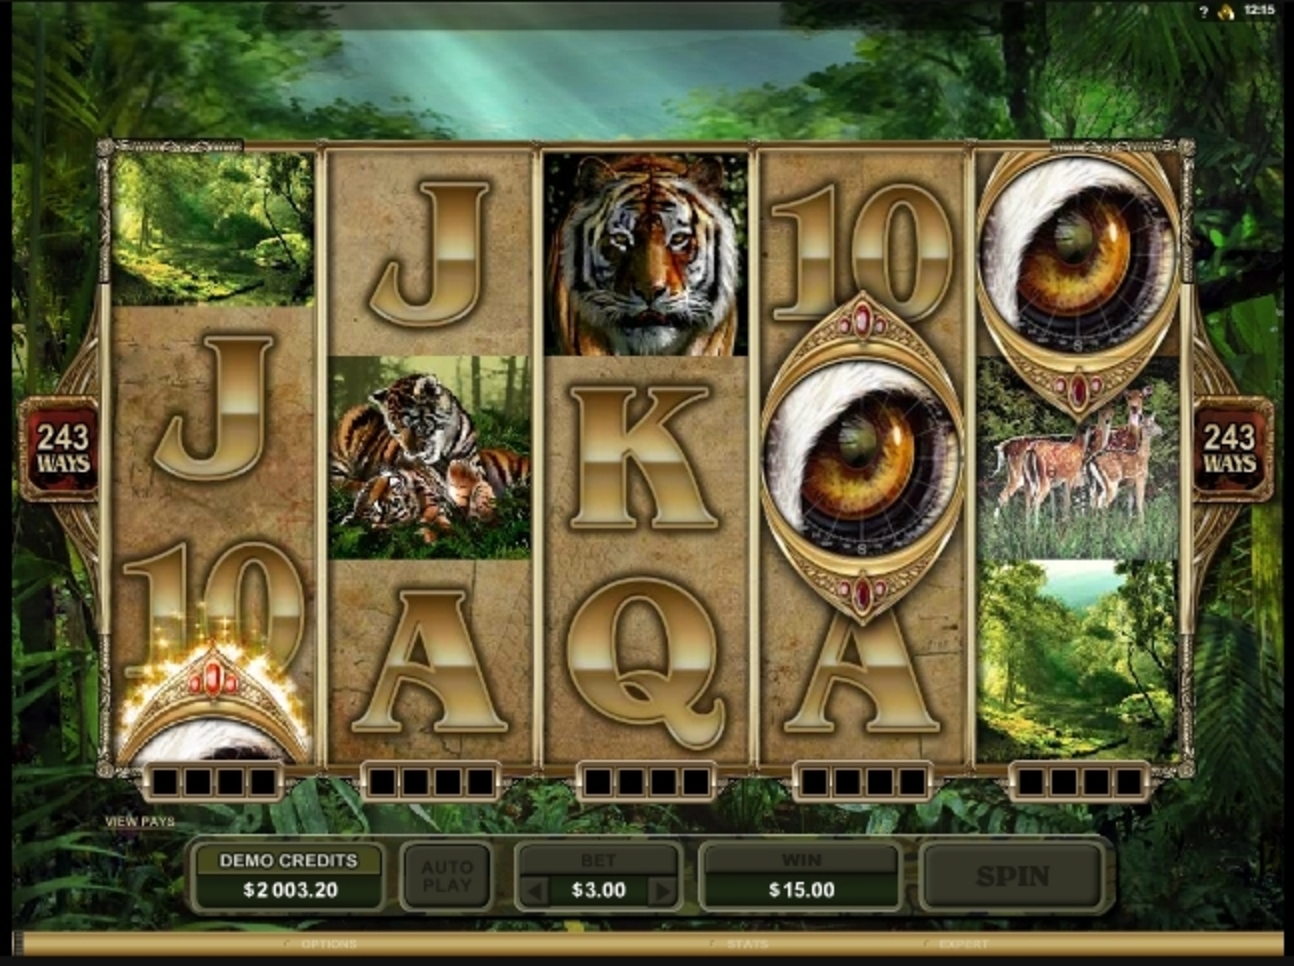 Win Money in Untamed Bengal Tiger Free Slot Game by Microgaming